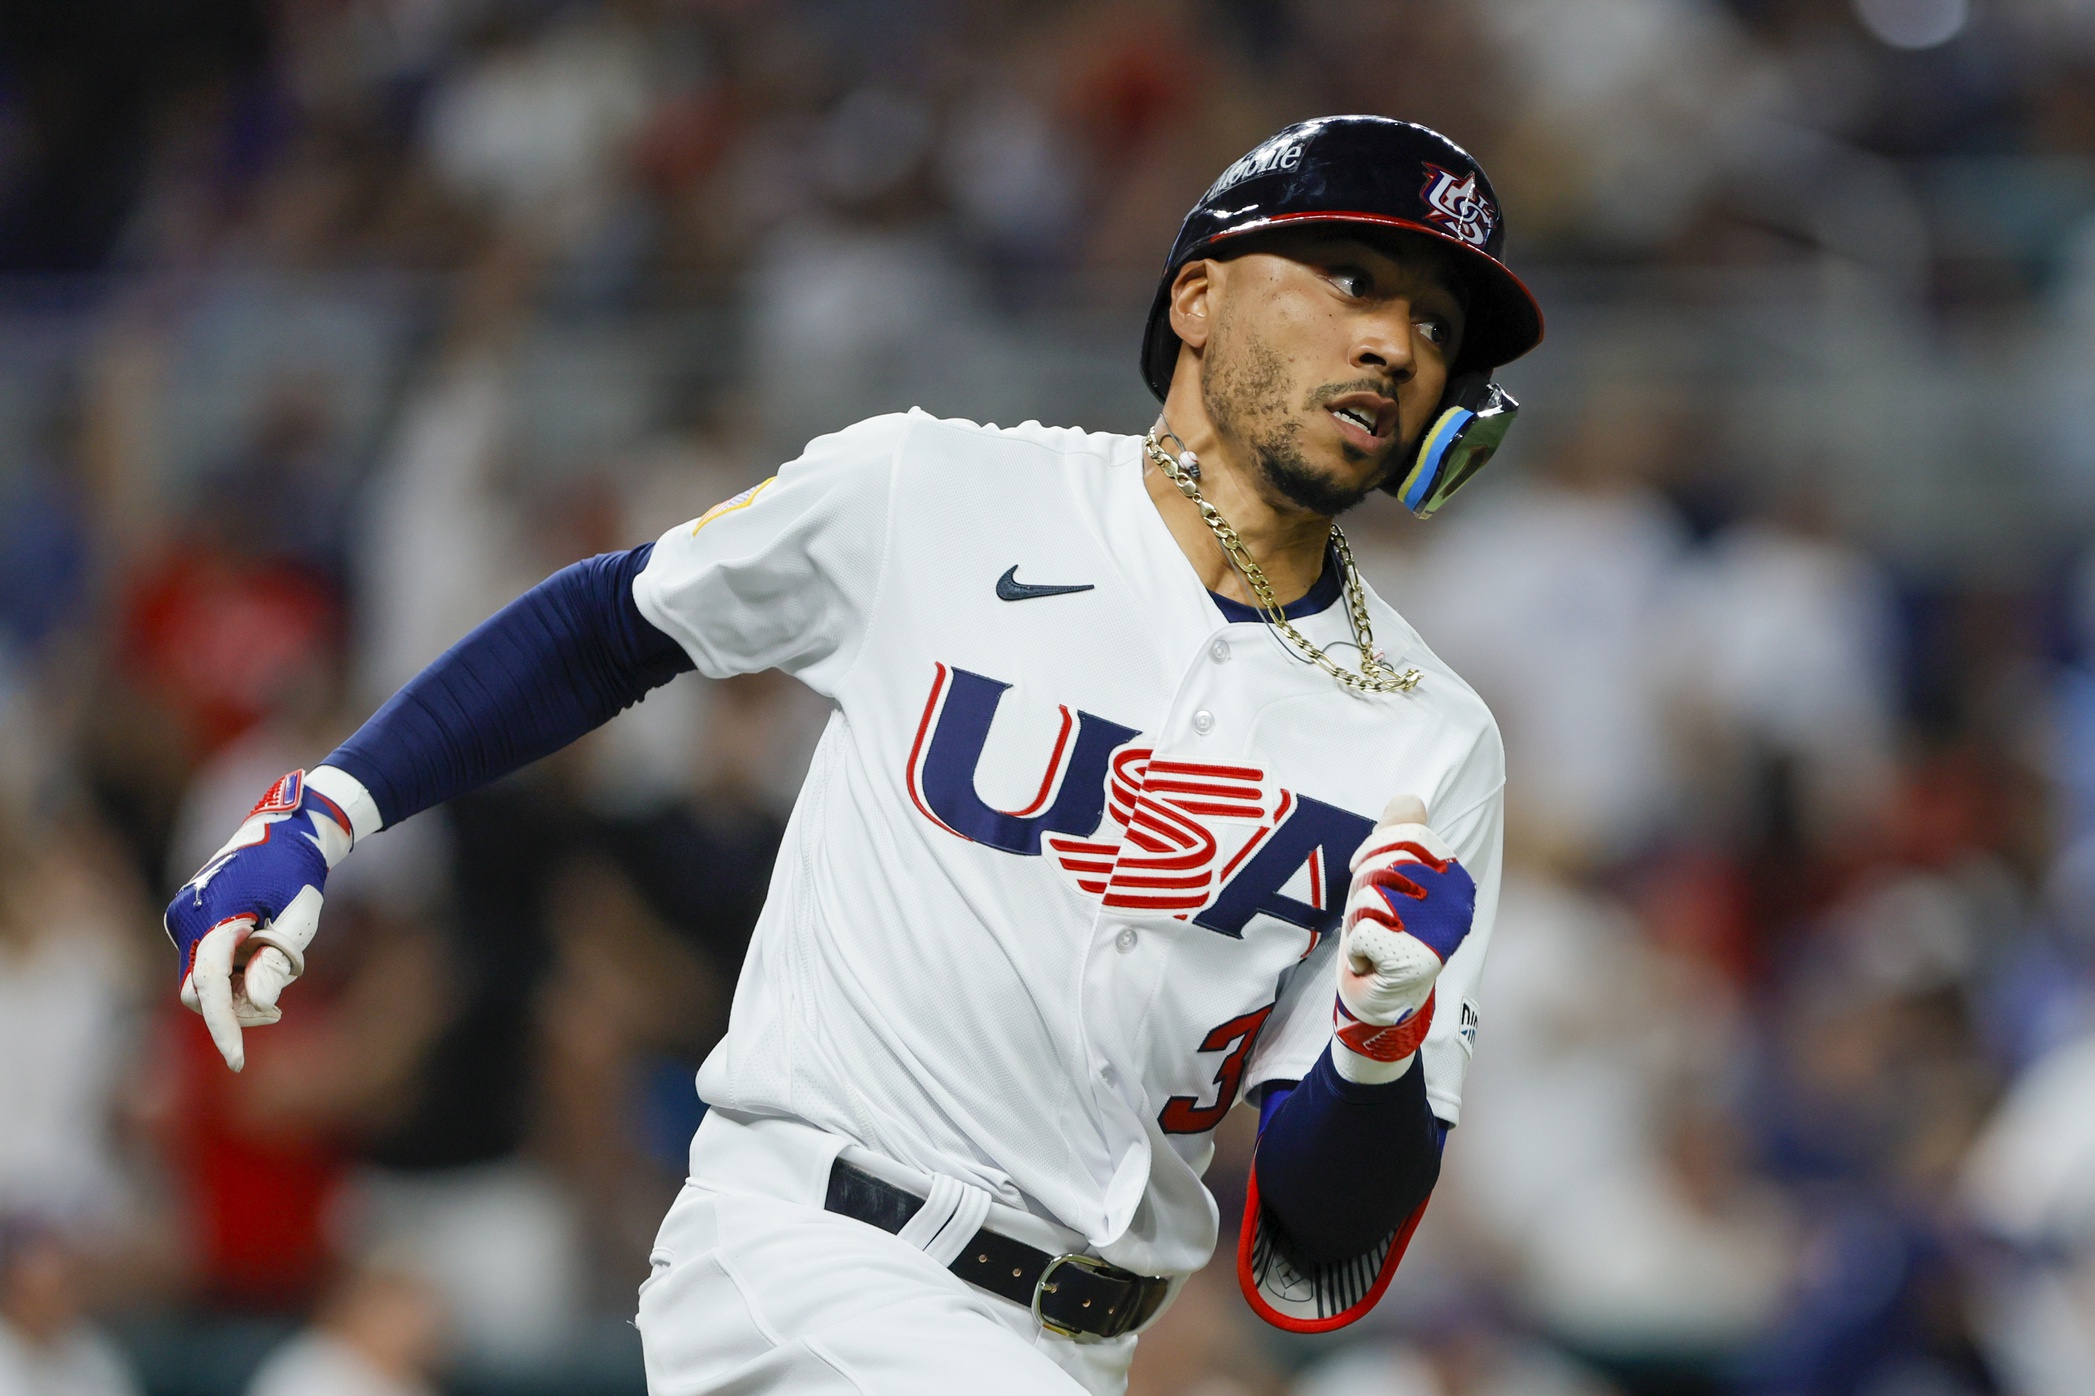 Mookie Betts, Freddie Freeman and More: How Well Did Dodgers Play in the WBC?